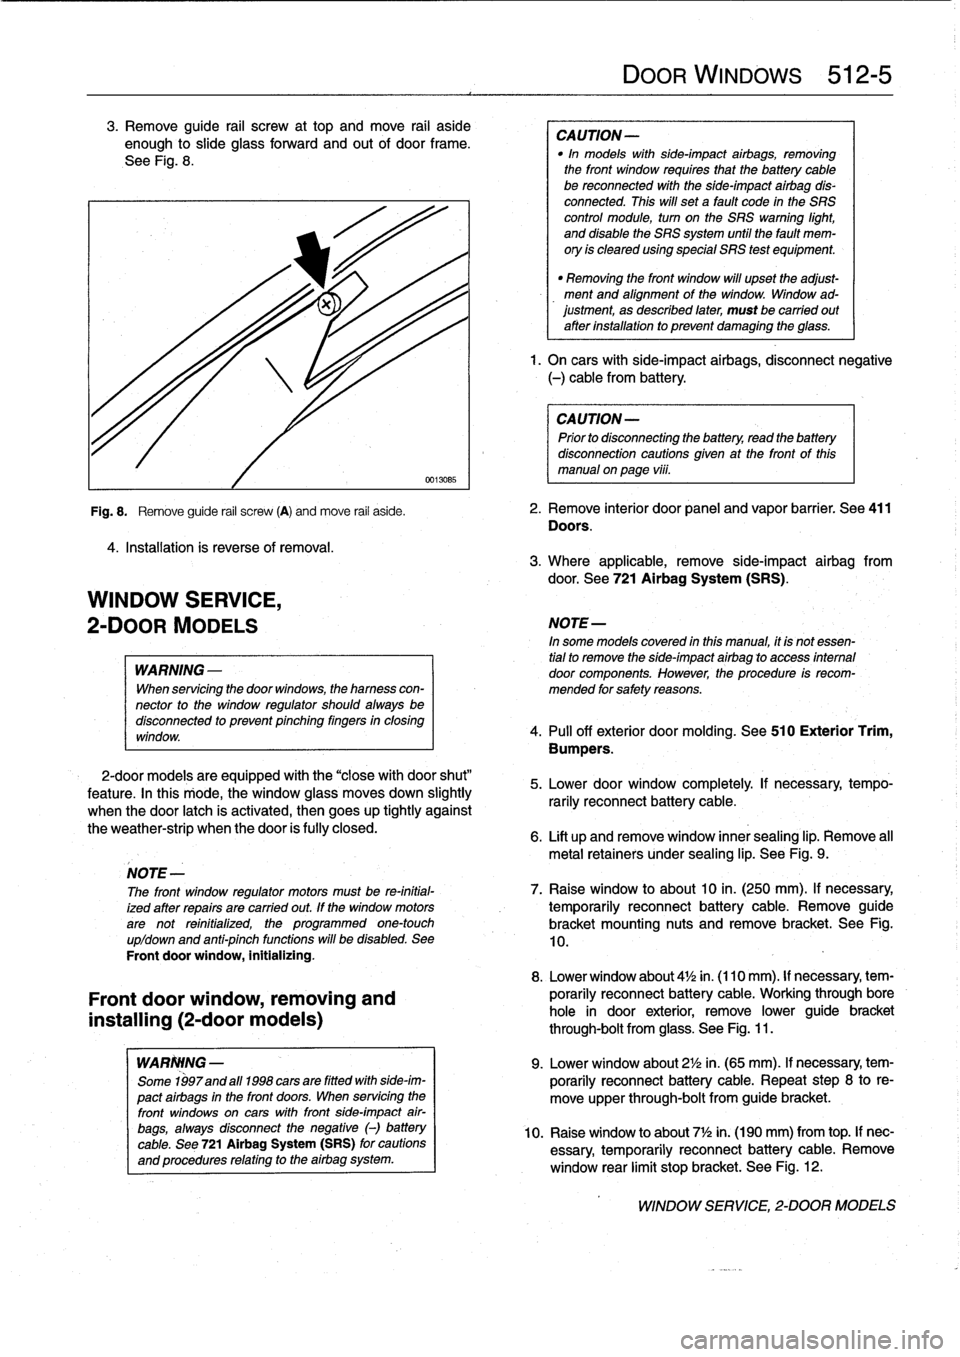 BMW 323i 1998 E36 Workshop Manual 
3
.
Remove
guide
rail
screw
at
top
and
move
rail
aside
enough
to
slide
glass
forward
and
out
of
door
frame
.

See
Fig
.
8
.

4
.
Installation
is
reverse
of
removal
.

WINDOW
SERVICE,

2-DOOR
MODELS

